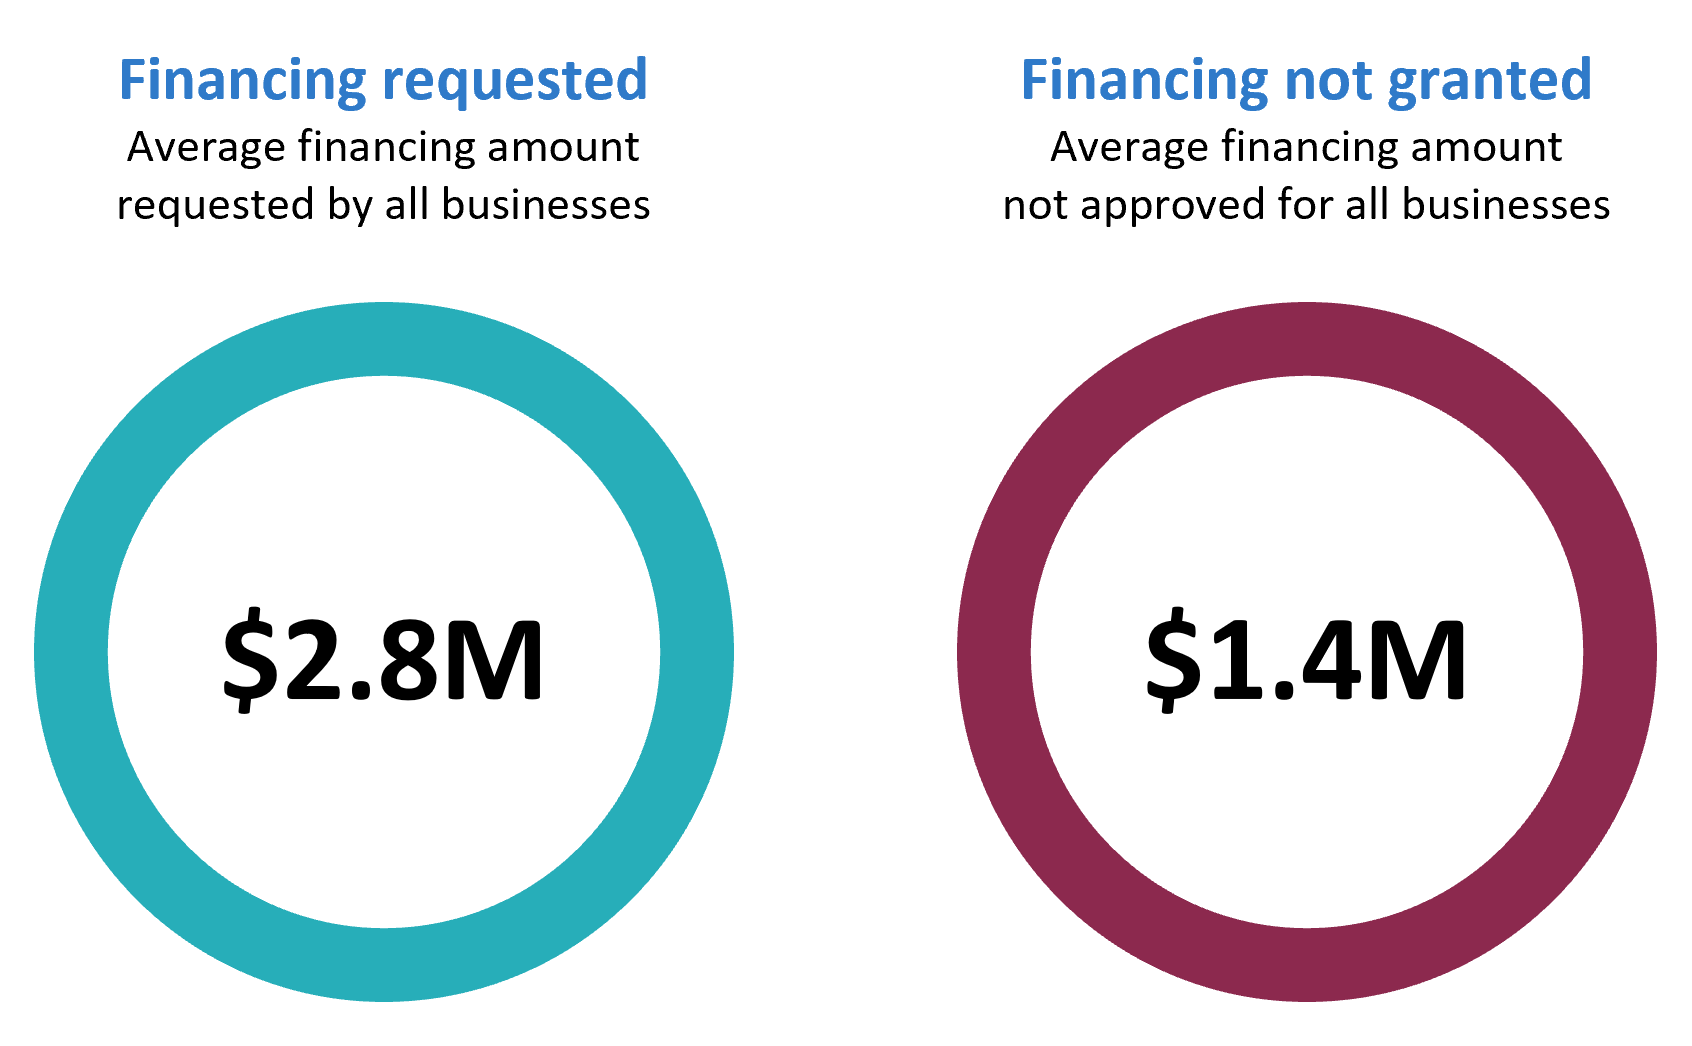 Average financing requests totalling $2.8 million. An average of $1.4 million was not granted to these businesses.